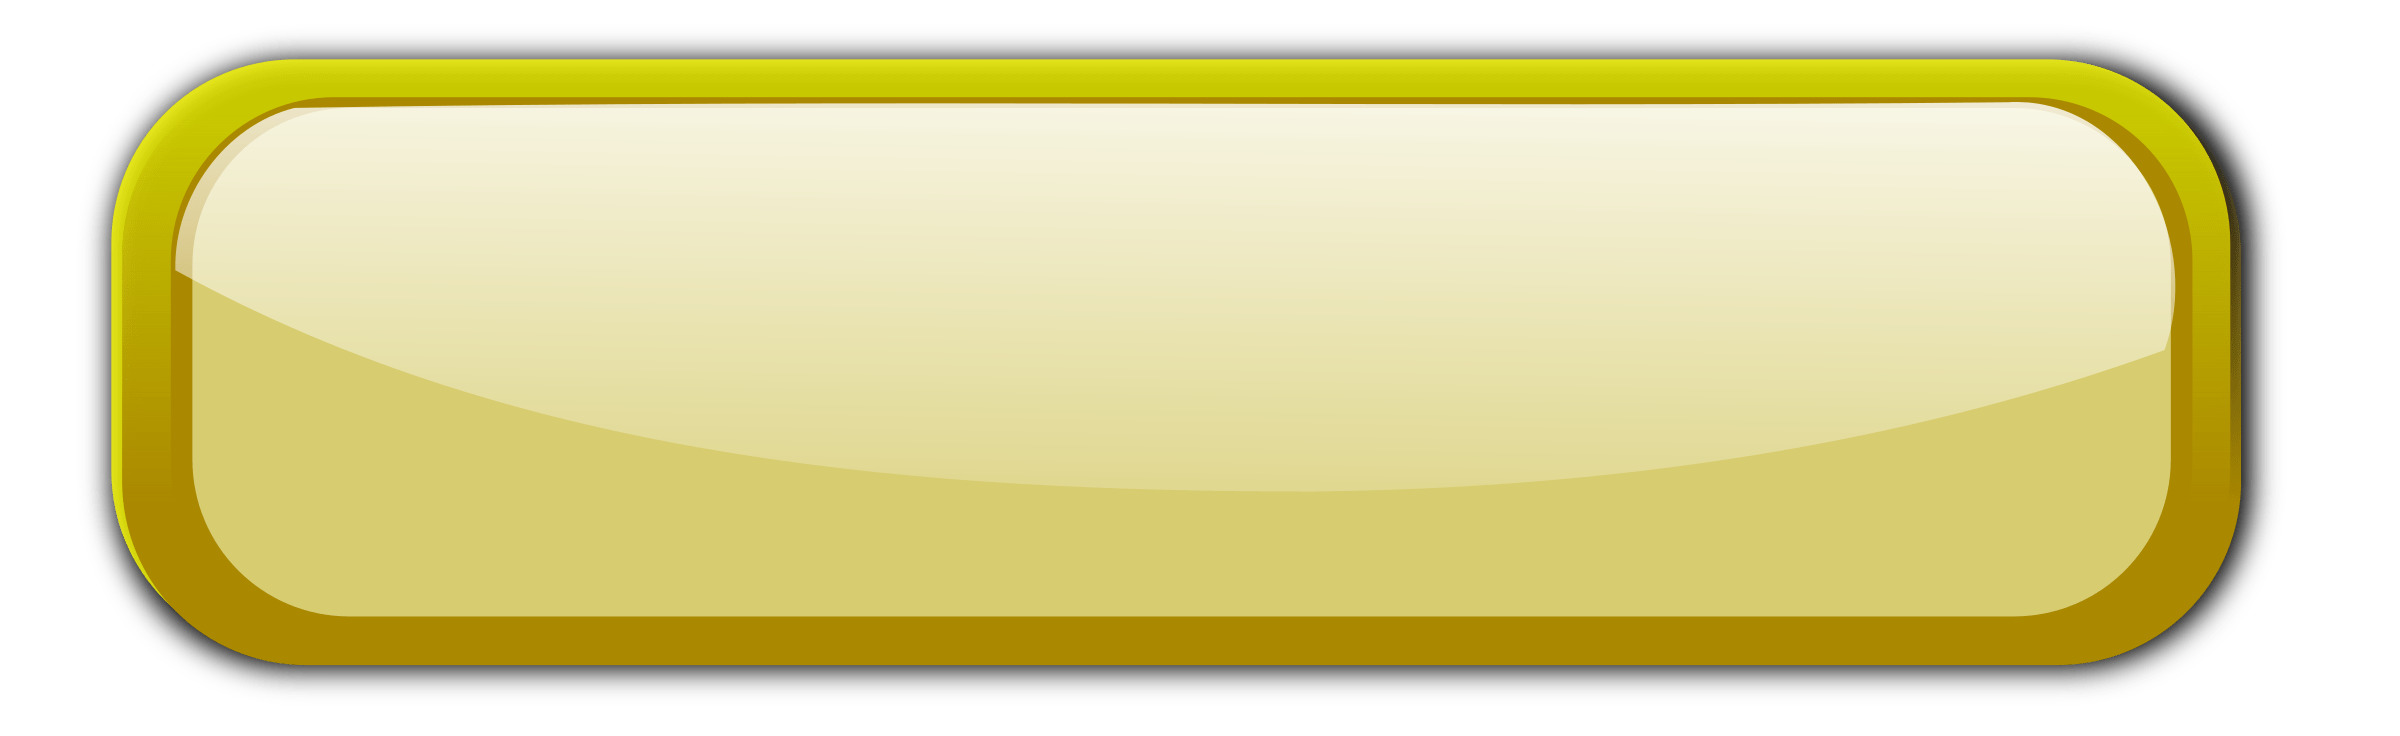 Large Gold Button With Border PNG icons